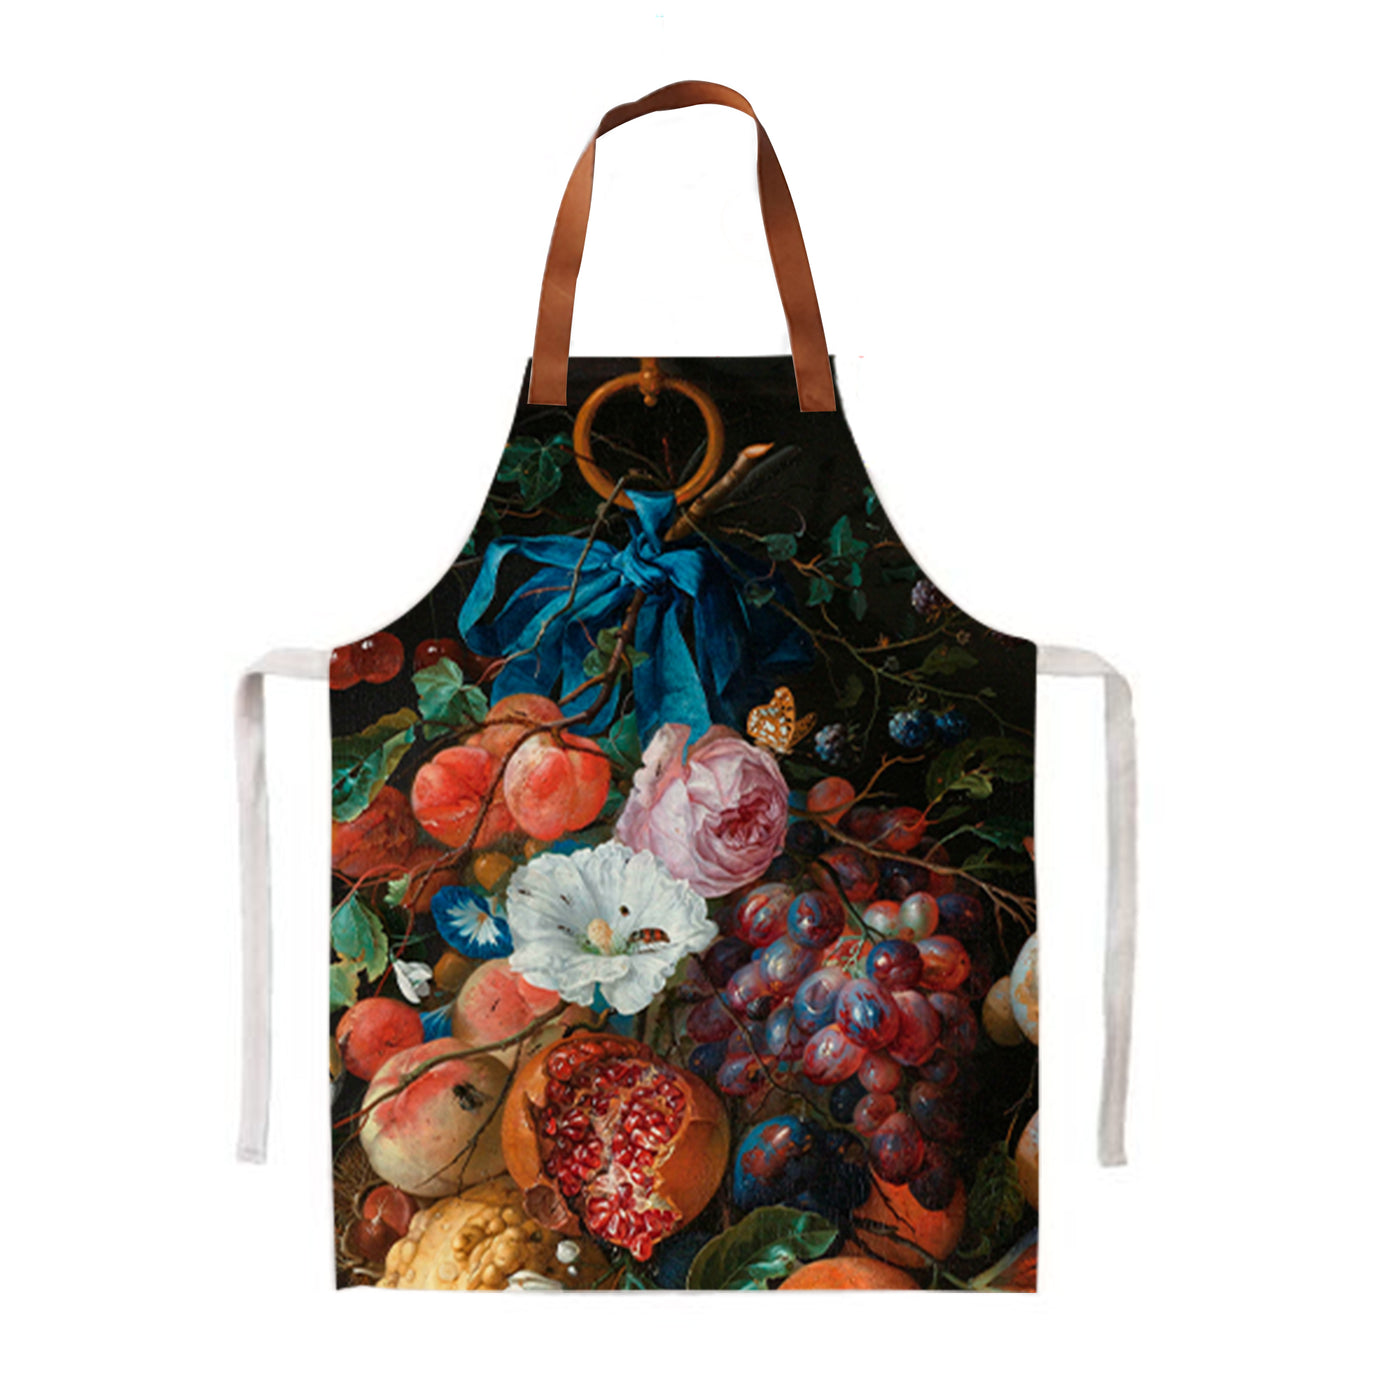 Cloth apron with leather neck strap and white cloth waist straps. Printed artwork on the front titled Still Life. Various Fruit and flowers in dark setting with vibrant orange, red and dark blue. Insects are seen crawling over open fruits and inside flowers.